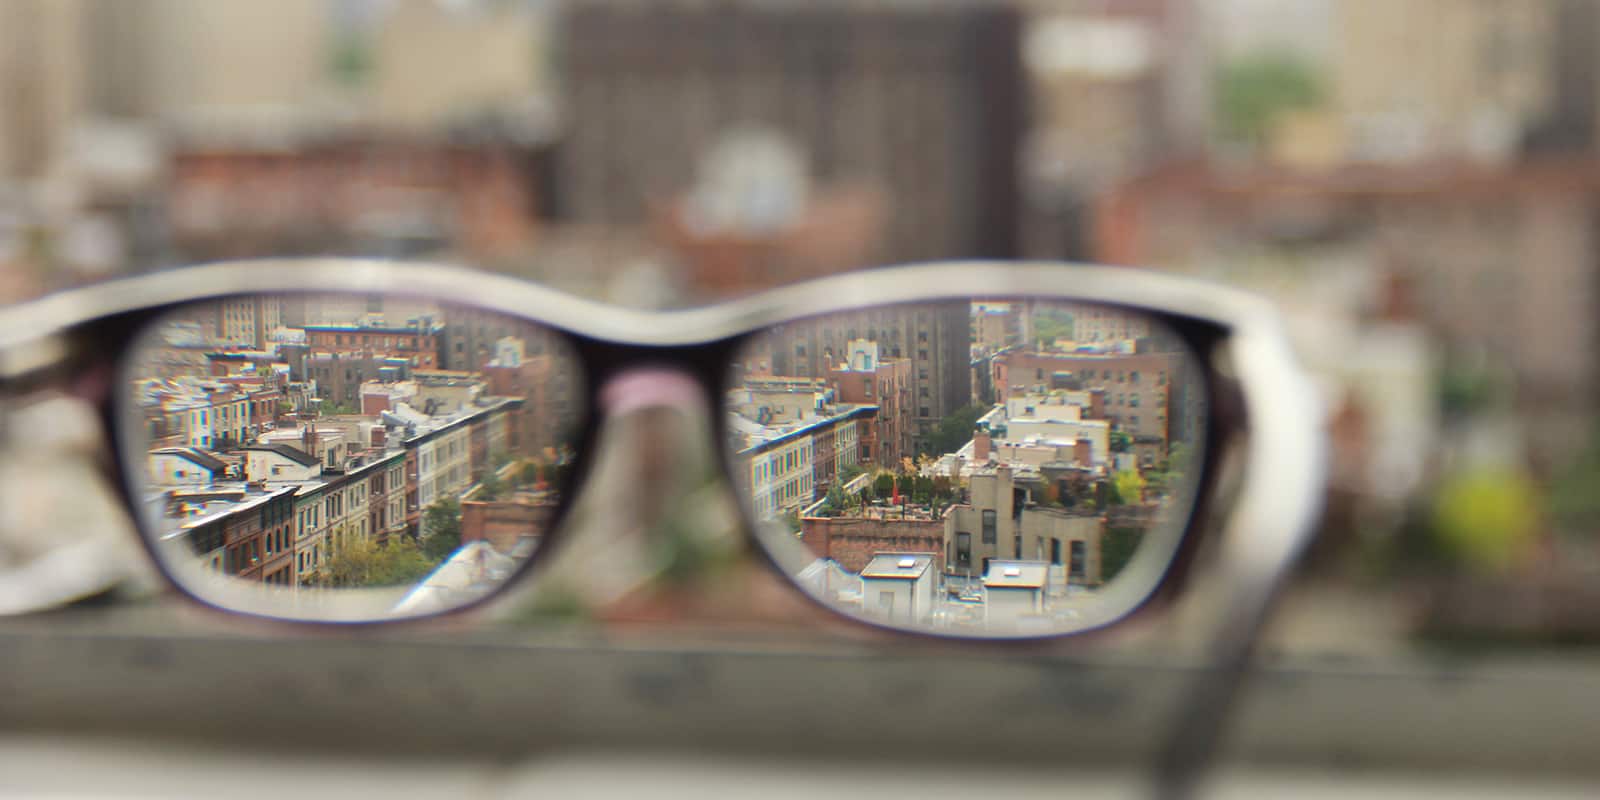 a pair of glasses looking out over a city, with the lenses in focus and the background blurred